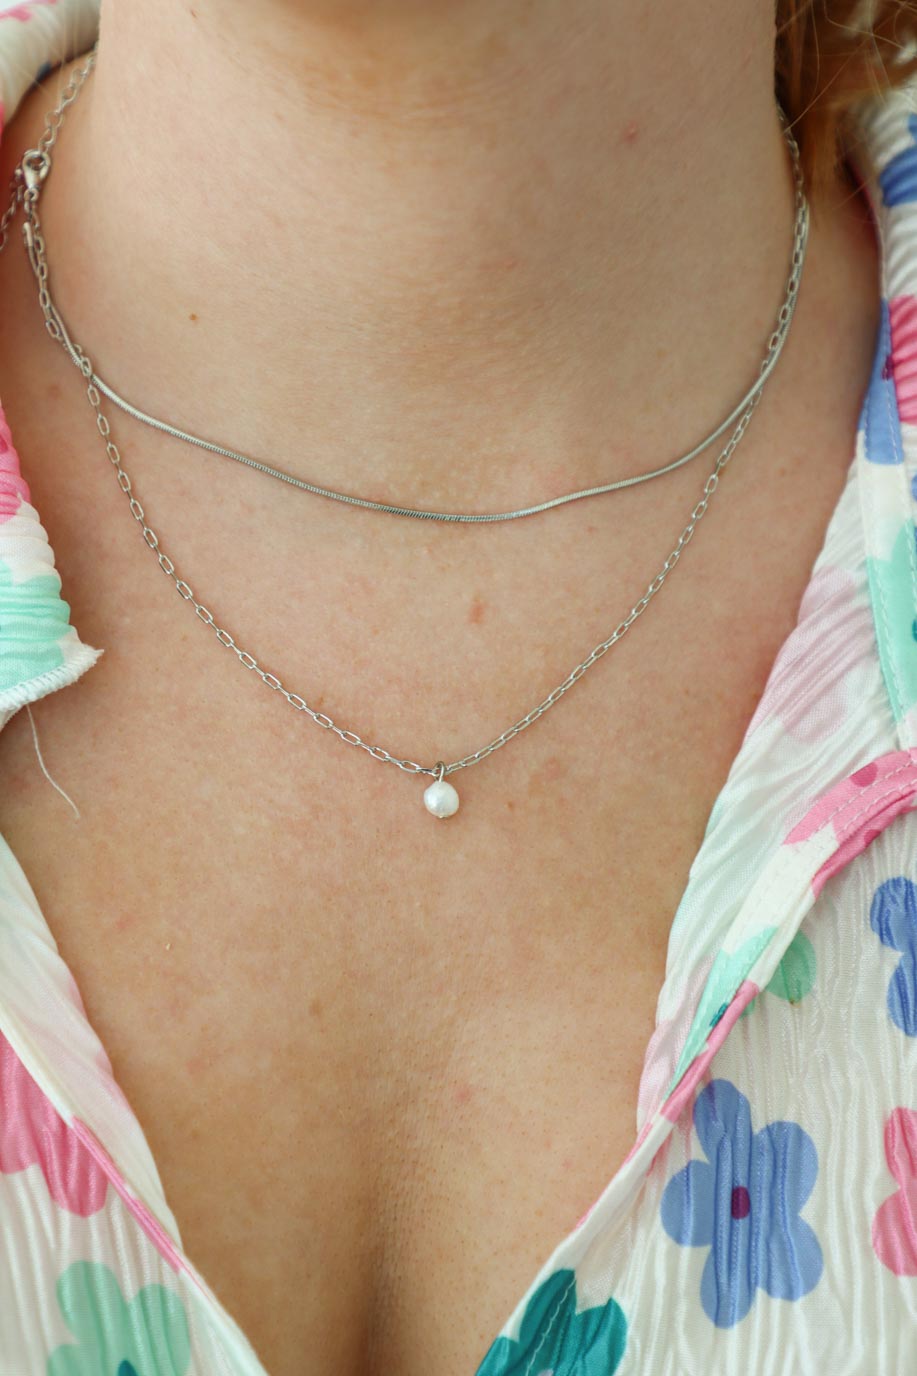 girl wearing silver chain necklace with pearl charm